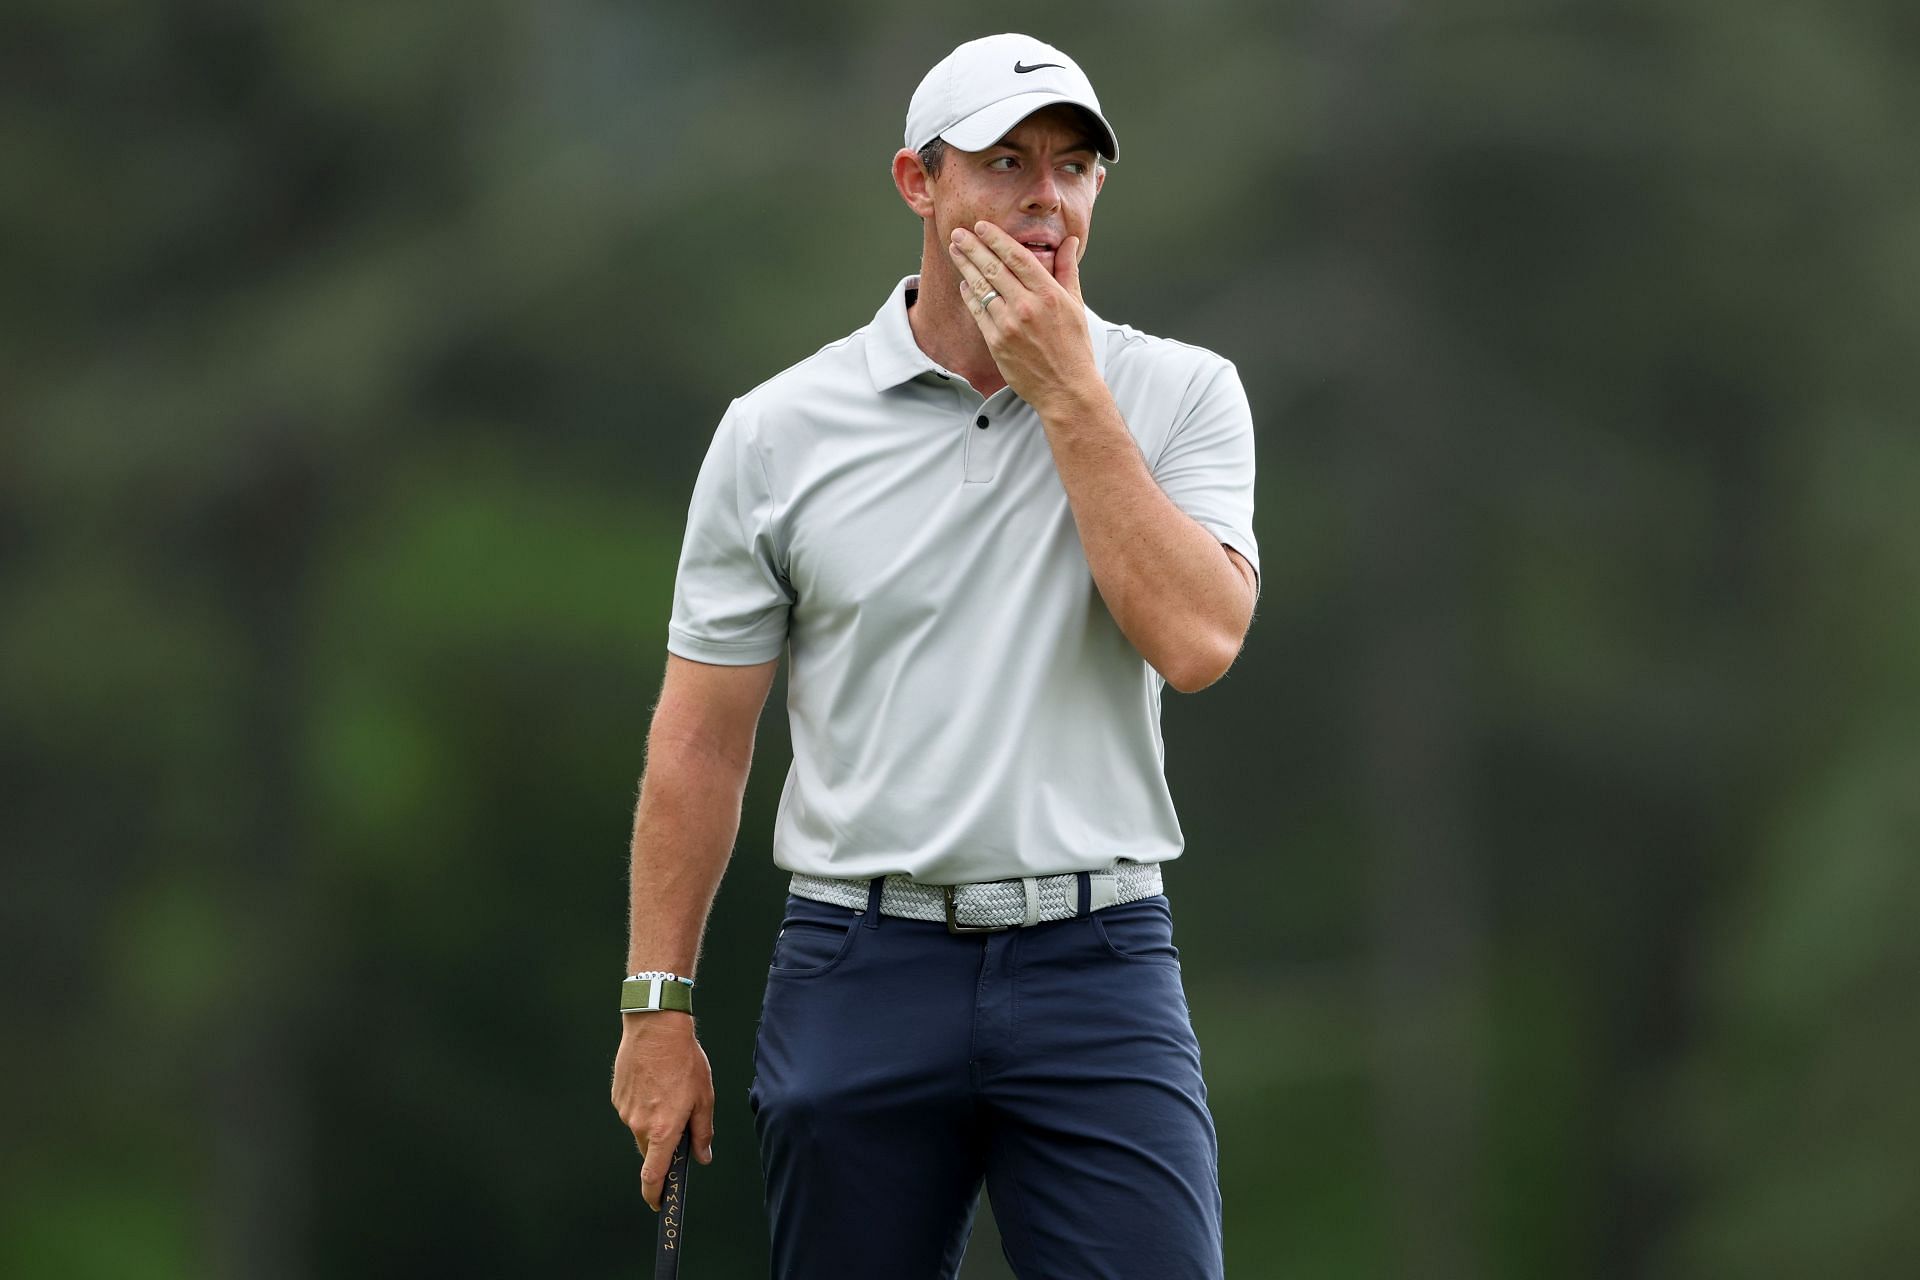 Rory McIlroy may miss the cut